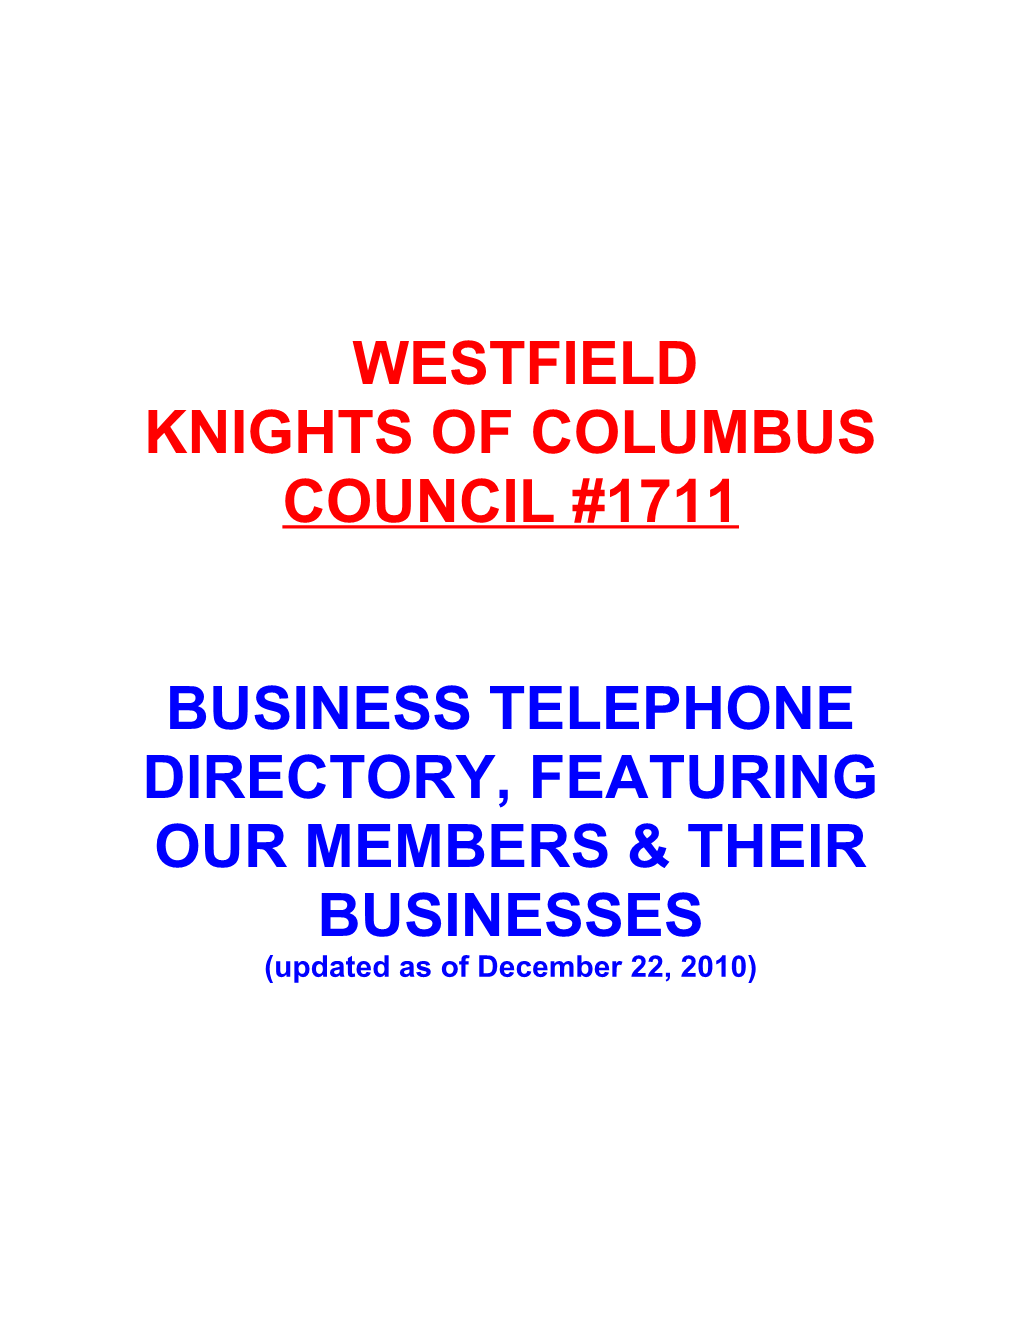 Directory, Featuring Our Members & Their Businesses